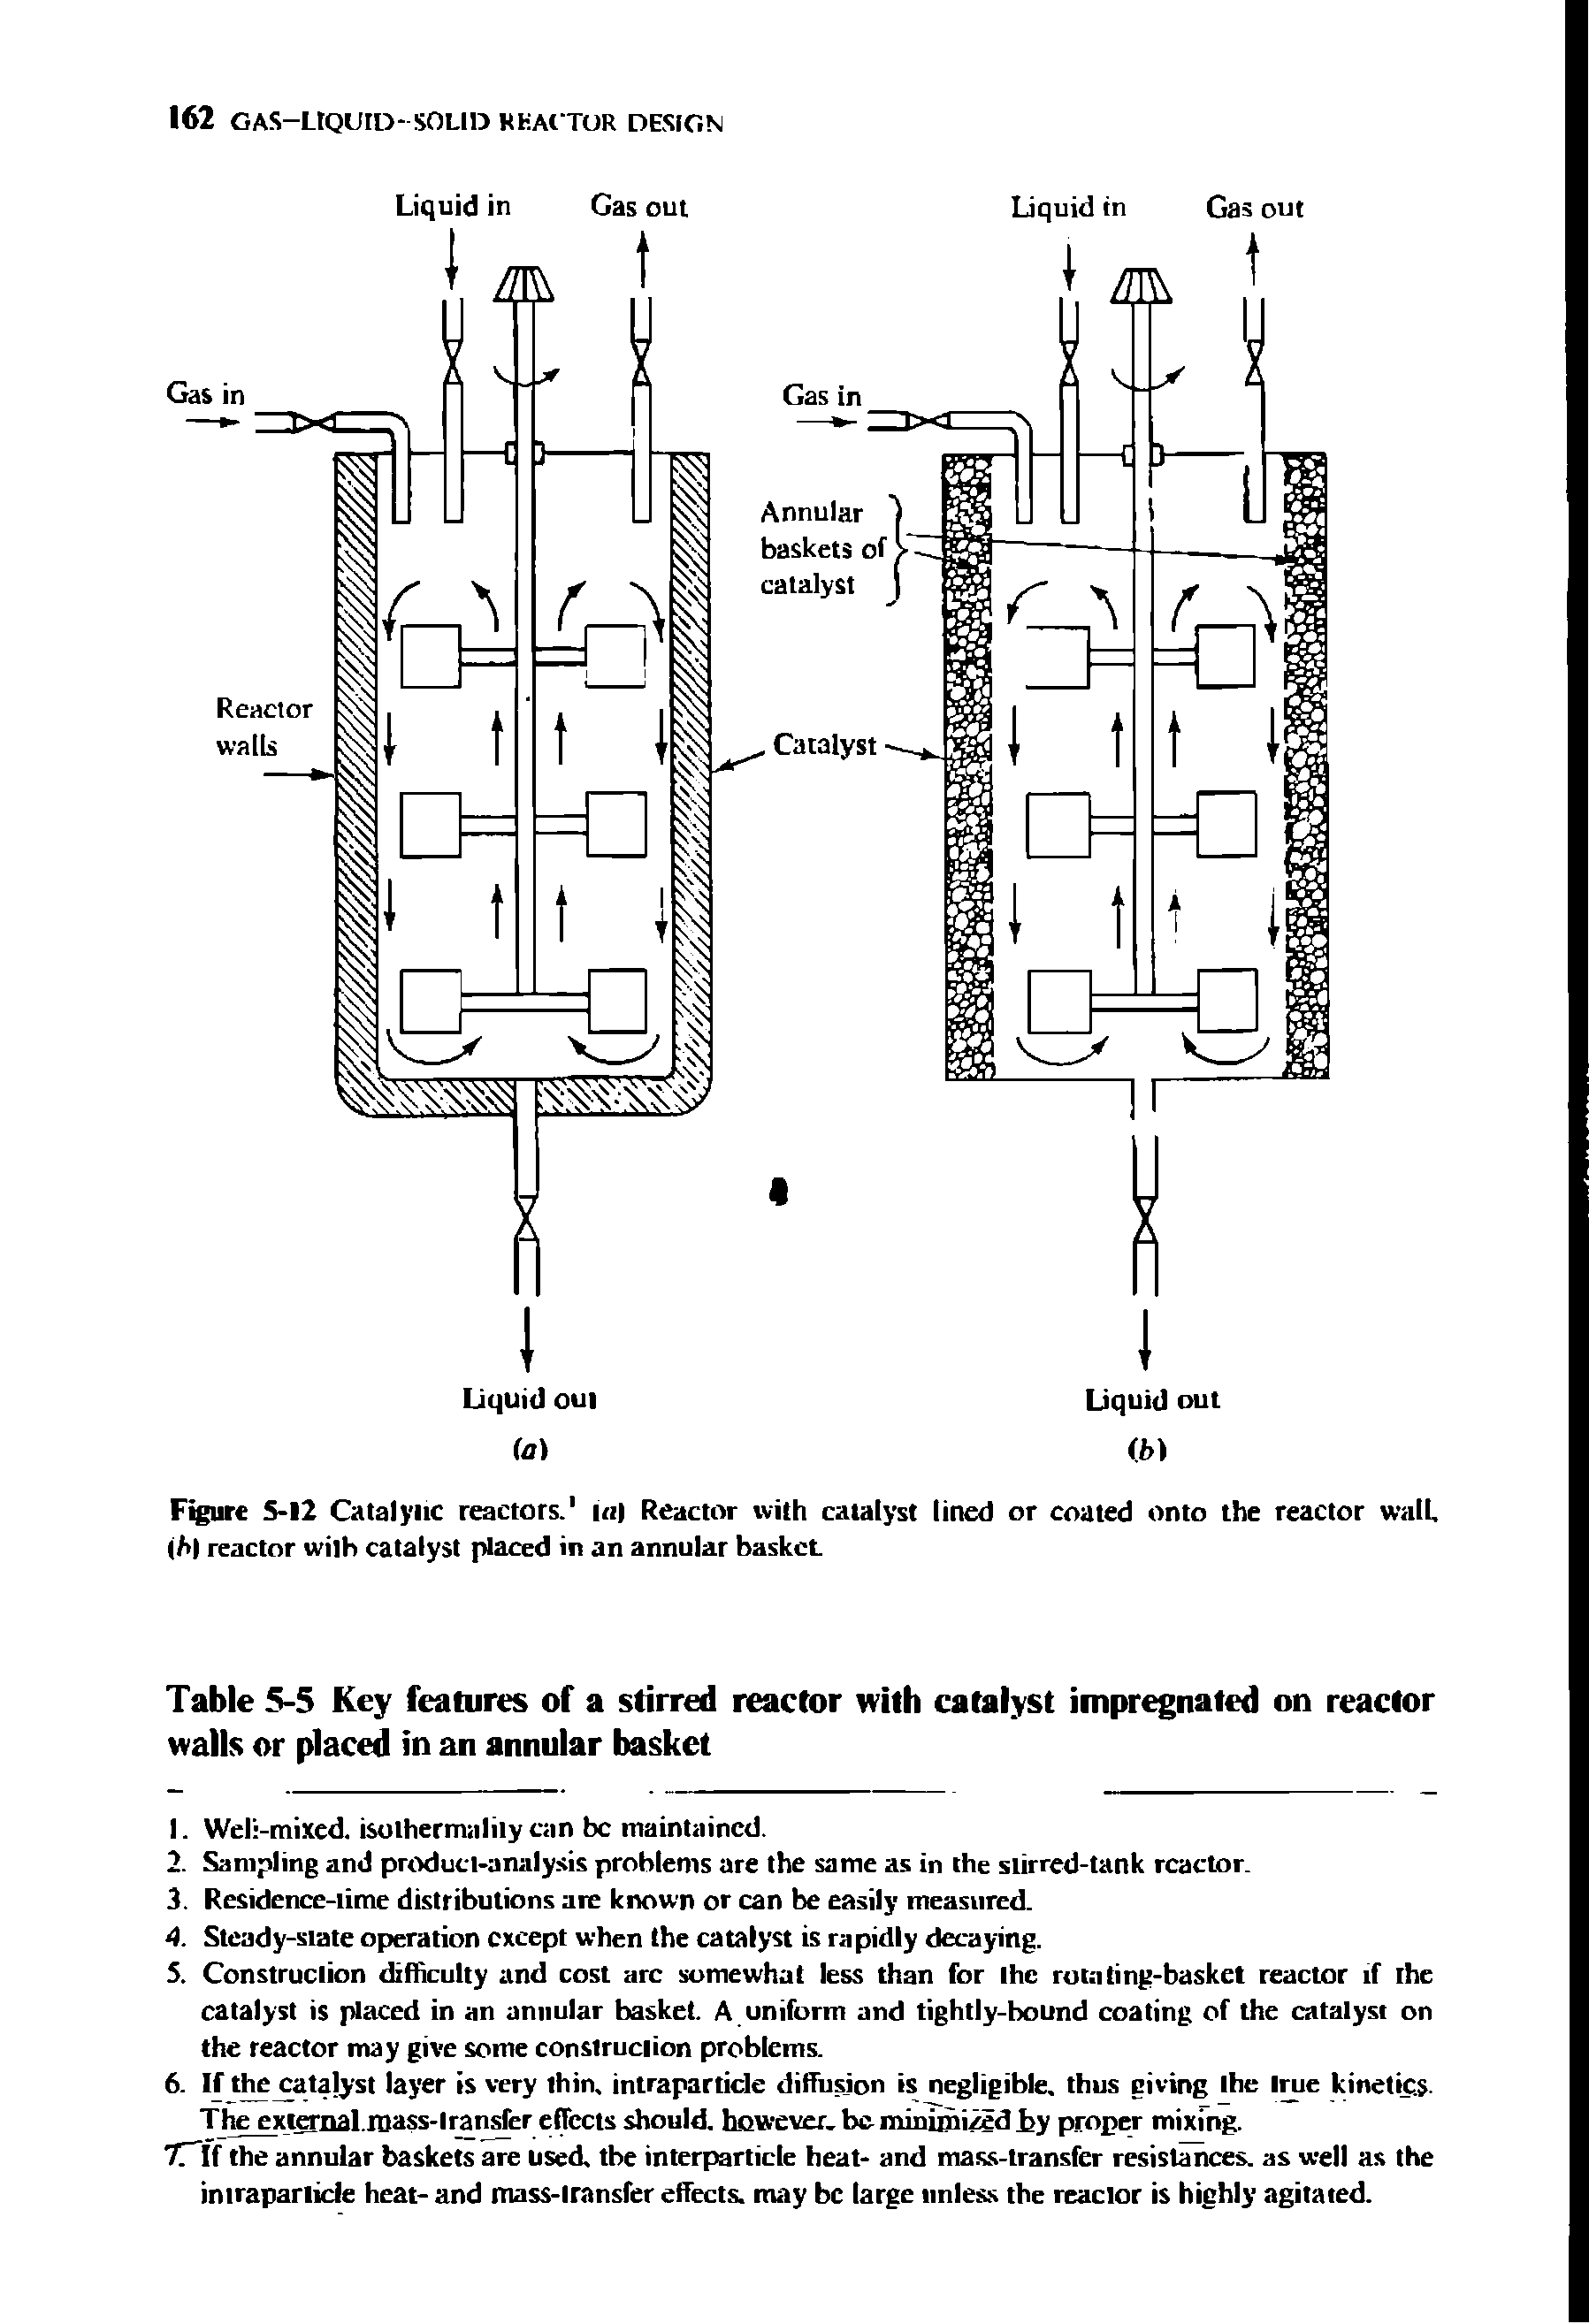 Figure S-12 Catalytic reactors.1 in) Reactor with catalyst lined or coated onto the reactor walk b reactor wilh catalyst placed in an annular basket...